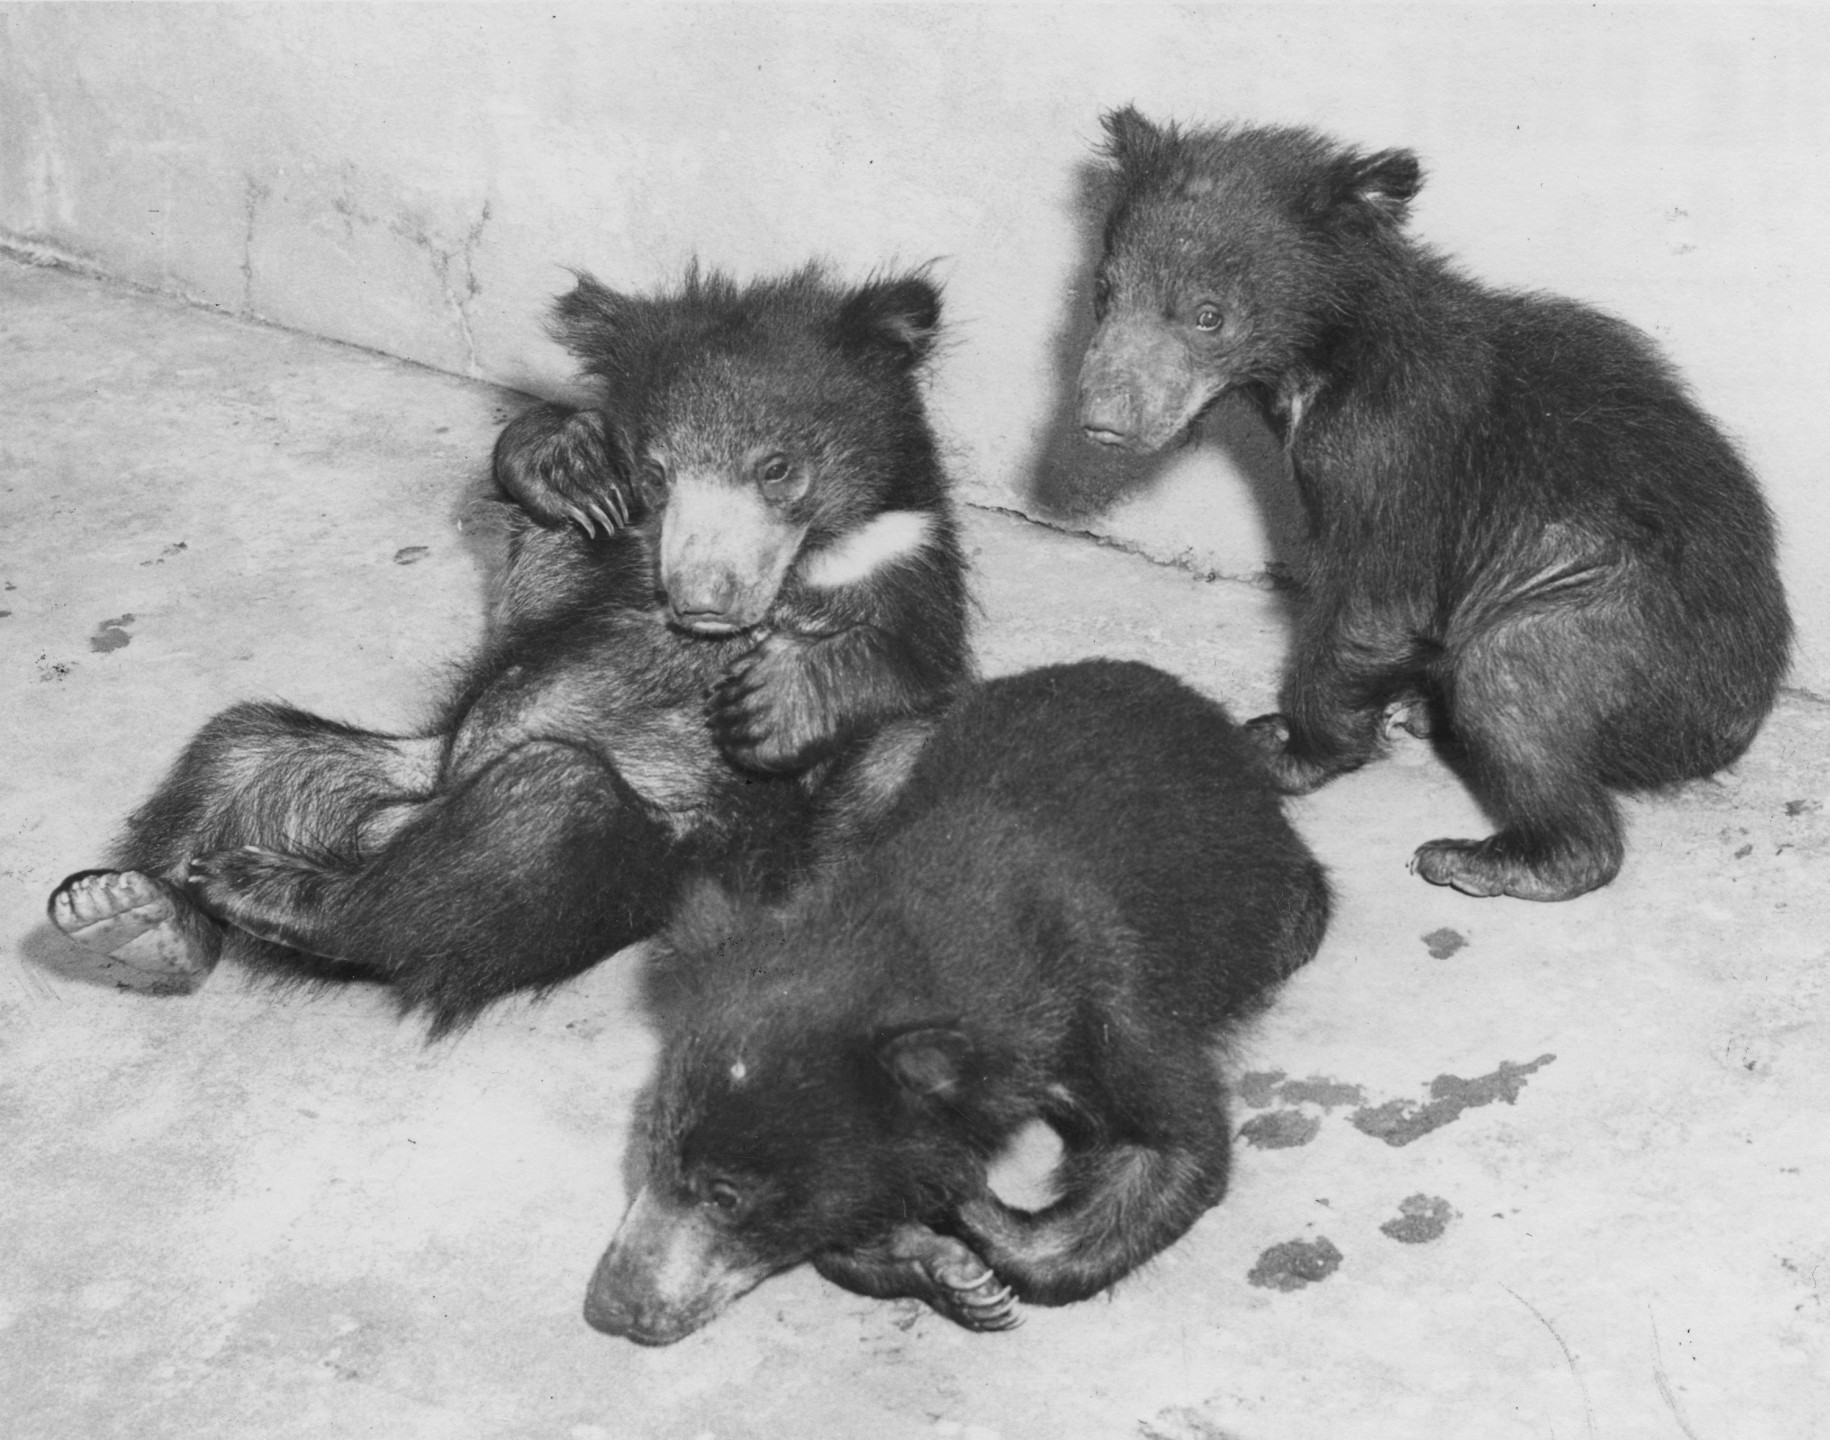 Named after characters from a famous children’s poem, the Zoo’s sloth bear trio, Wynken, Blynken, and Nod, had personalities worthy of their own story. Agile and active little Wynken, reported by ZOONOOZ to be the “dancer” of the group, “could win a jitter-bug contest very easily, but Blynken or Nod just won’t dance with him.” Blynken preferred to play at being the big bad wolf by huffing and puffing at everything—and failing to bring anything down. Nod, apparently the sensitive one, would hold up a dirty paw to show to visitors, while covering his eyes with the other paw and hanging his head in apparent dismay—much to the delight of the adoring crowds.